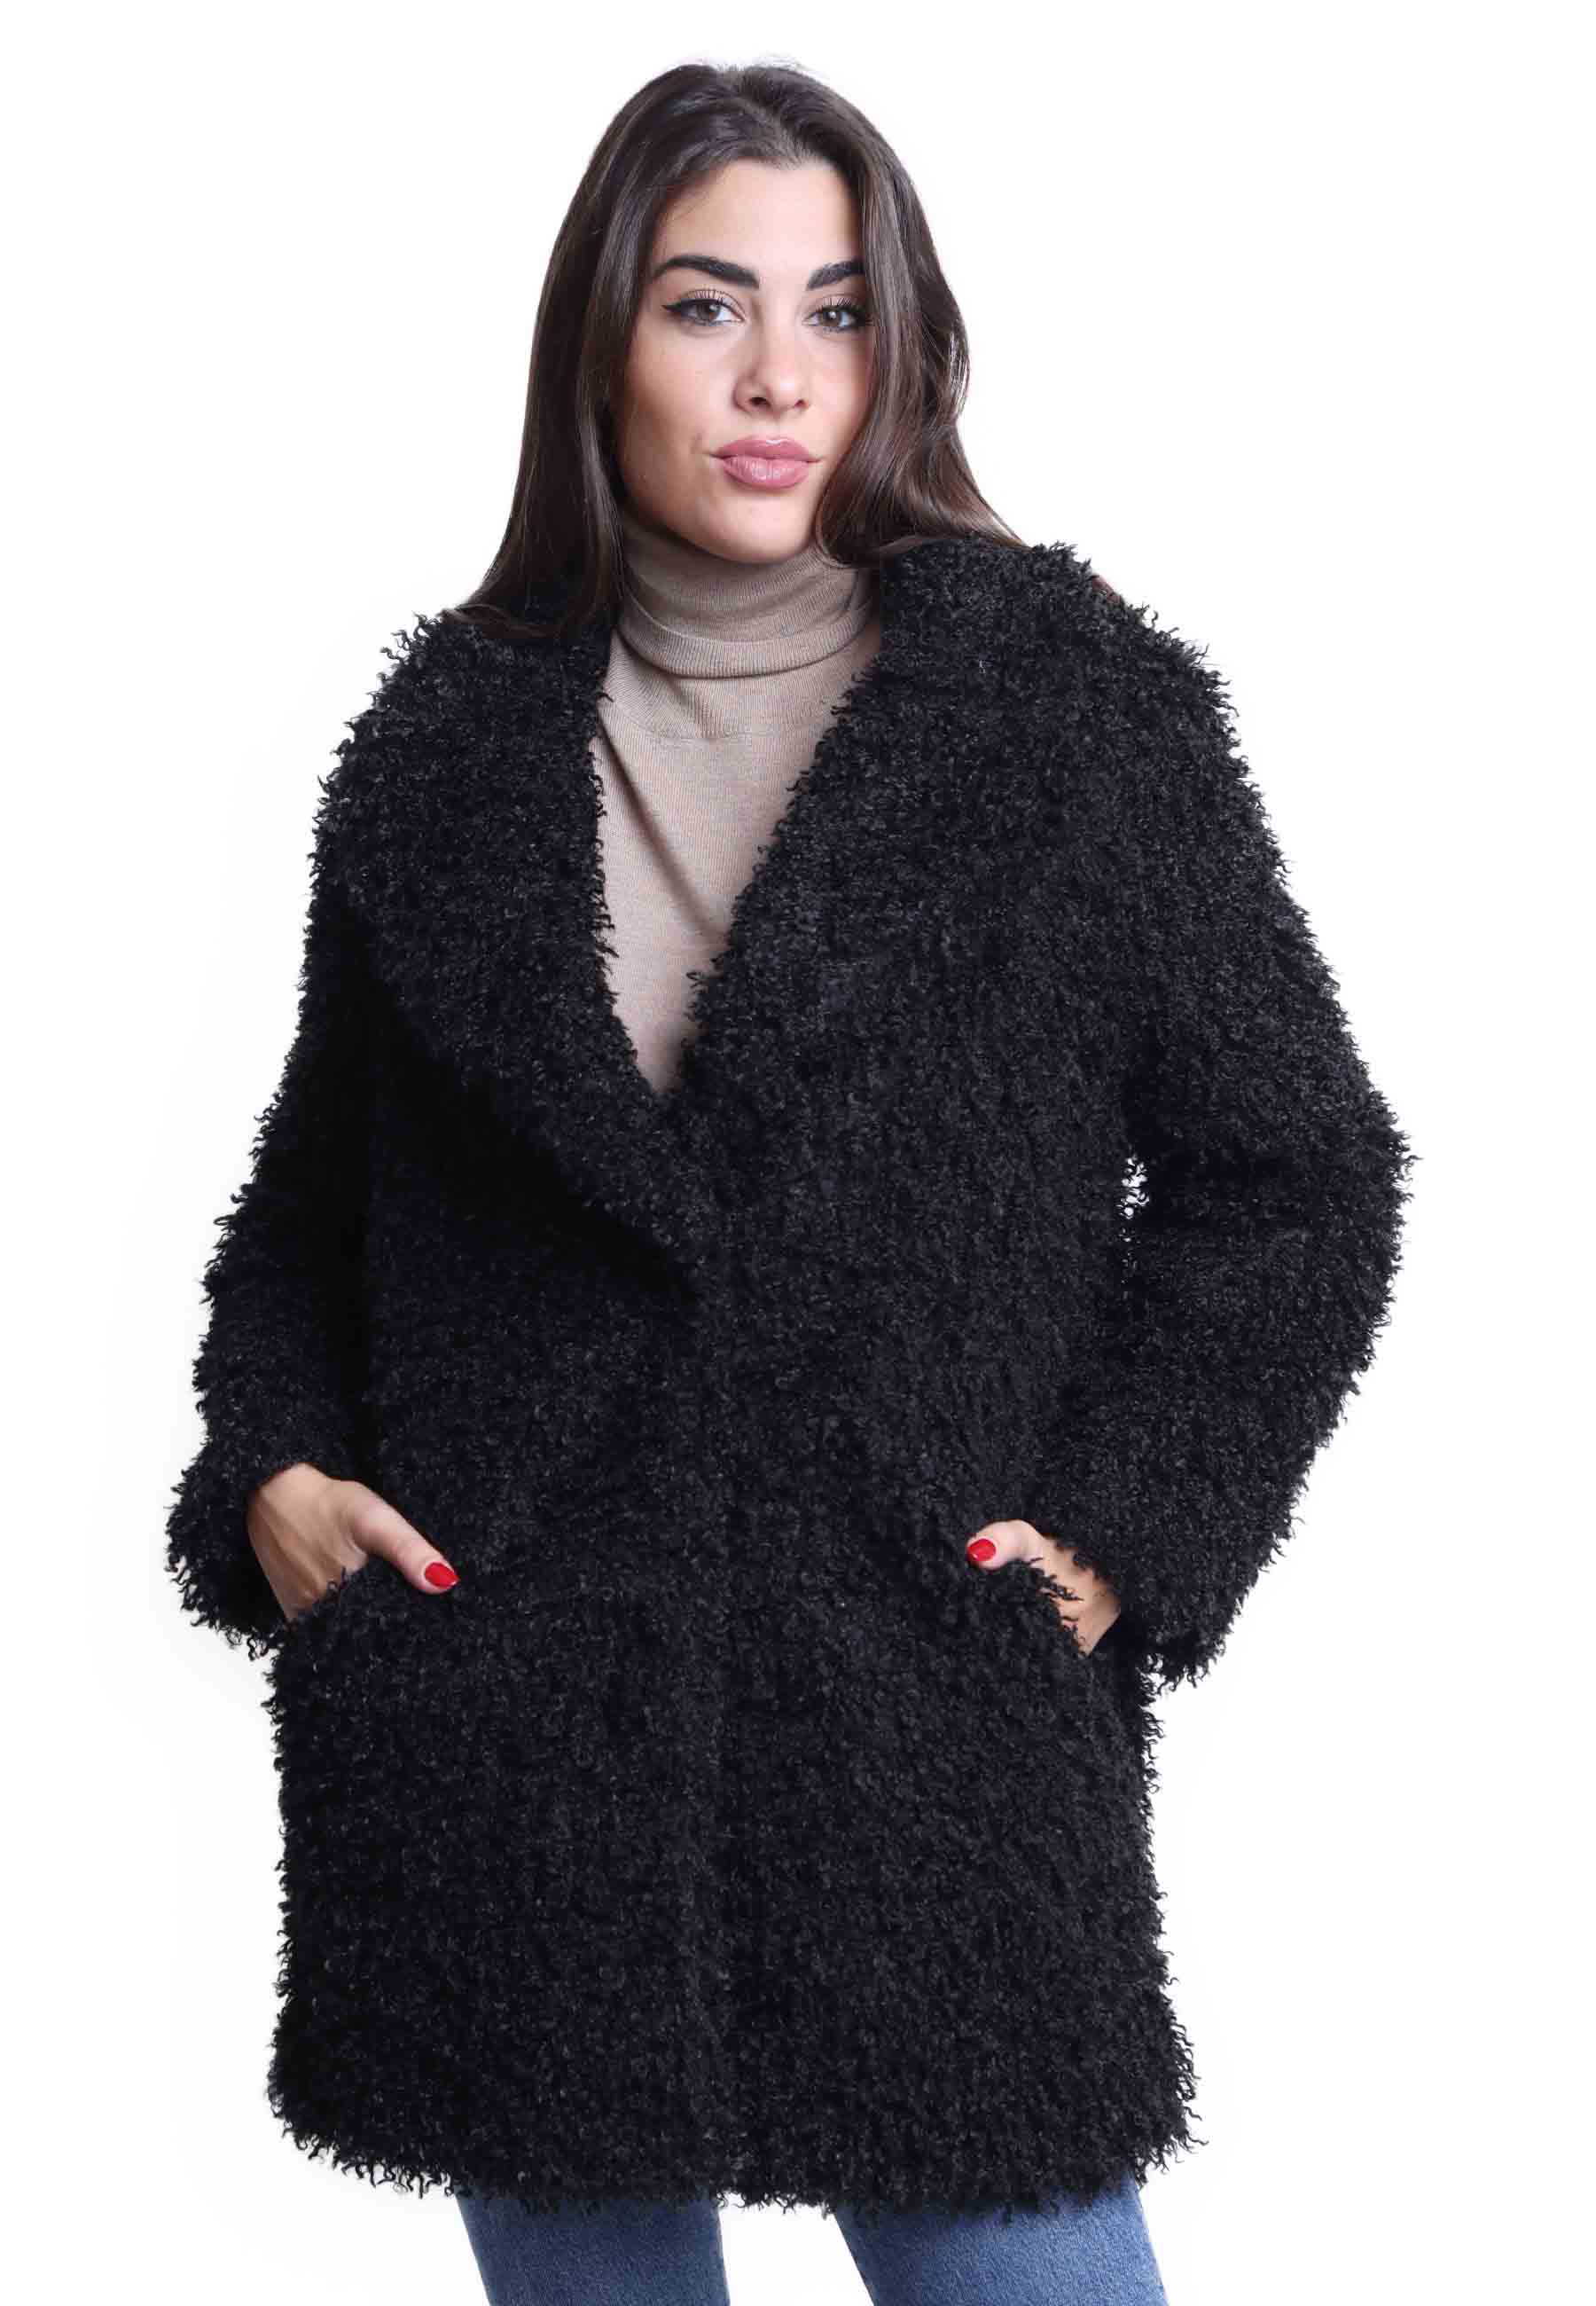 Women's teddy coats in black eco fur with large single-breasted one button